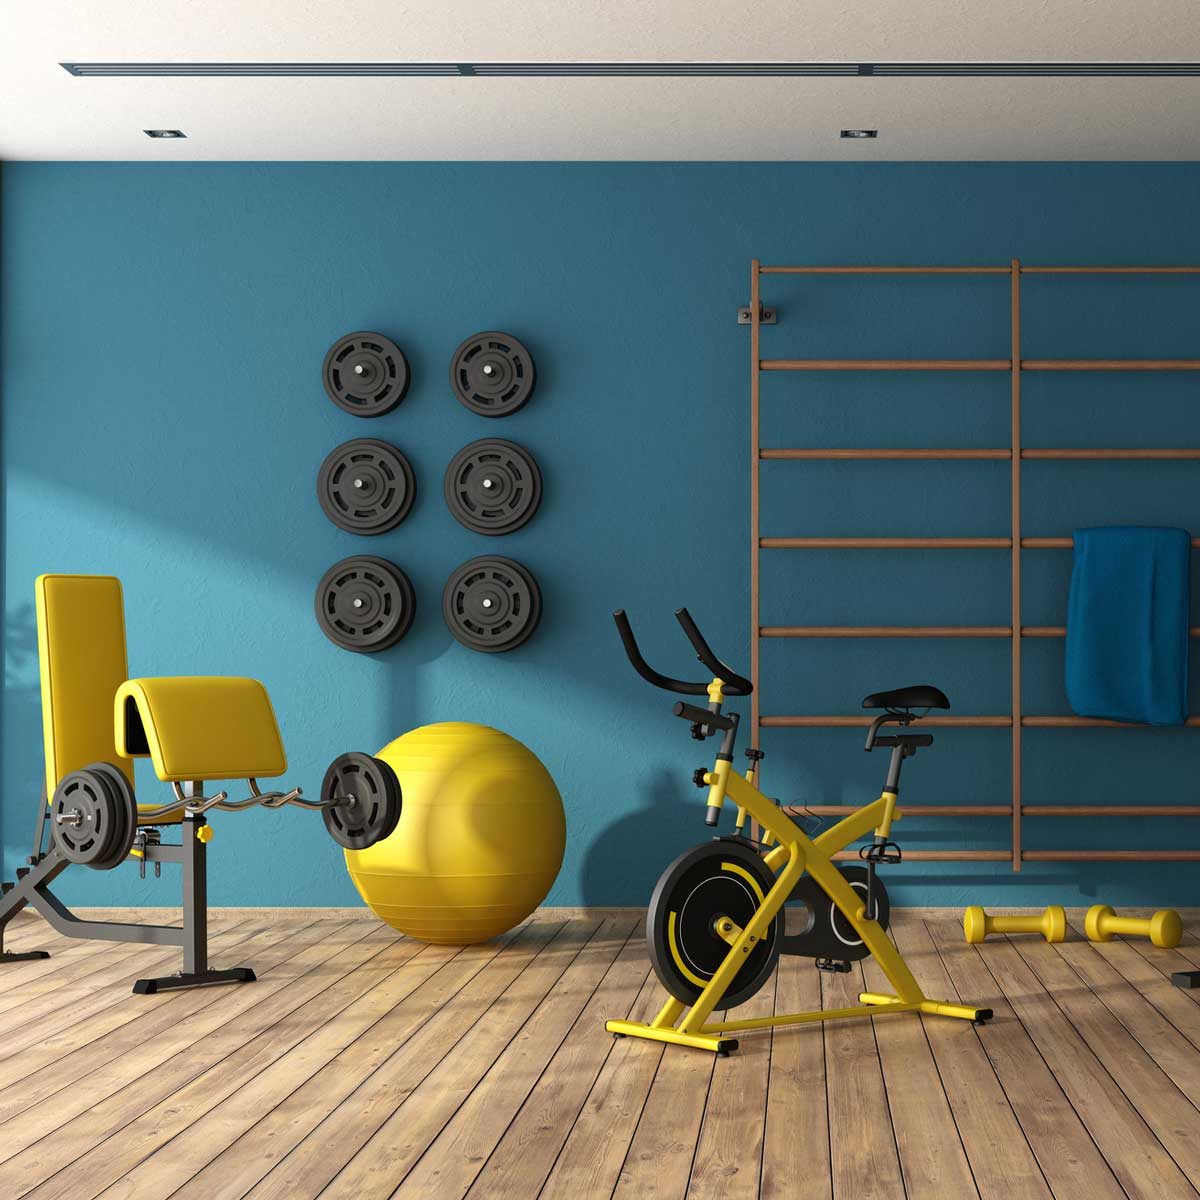 5 Stunning Ideas for the Perfect Home Gym Accent Wall